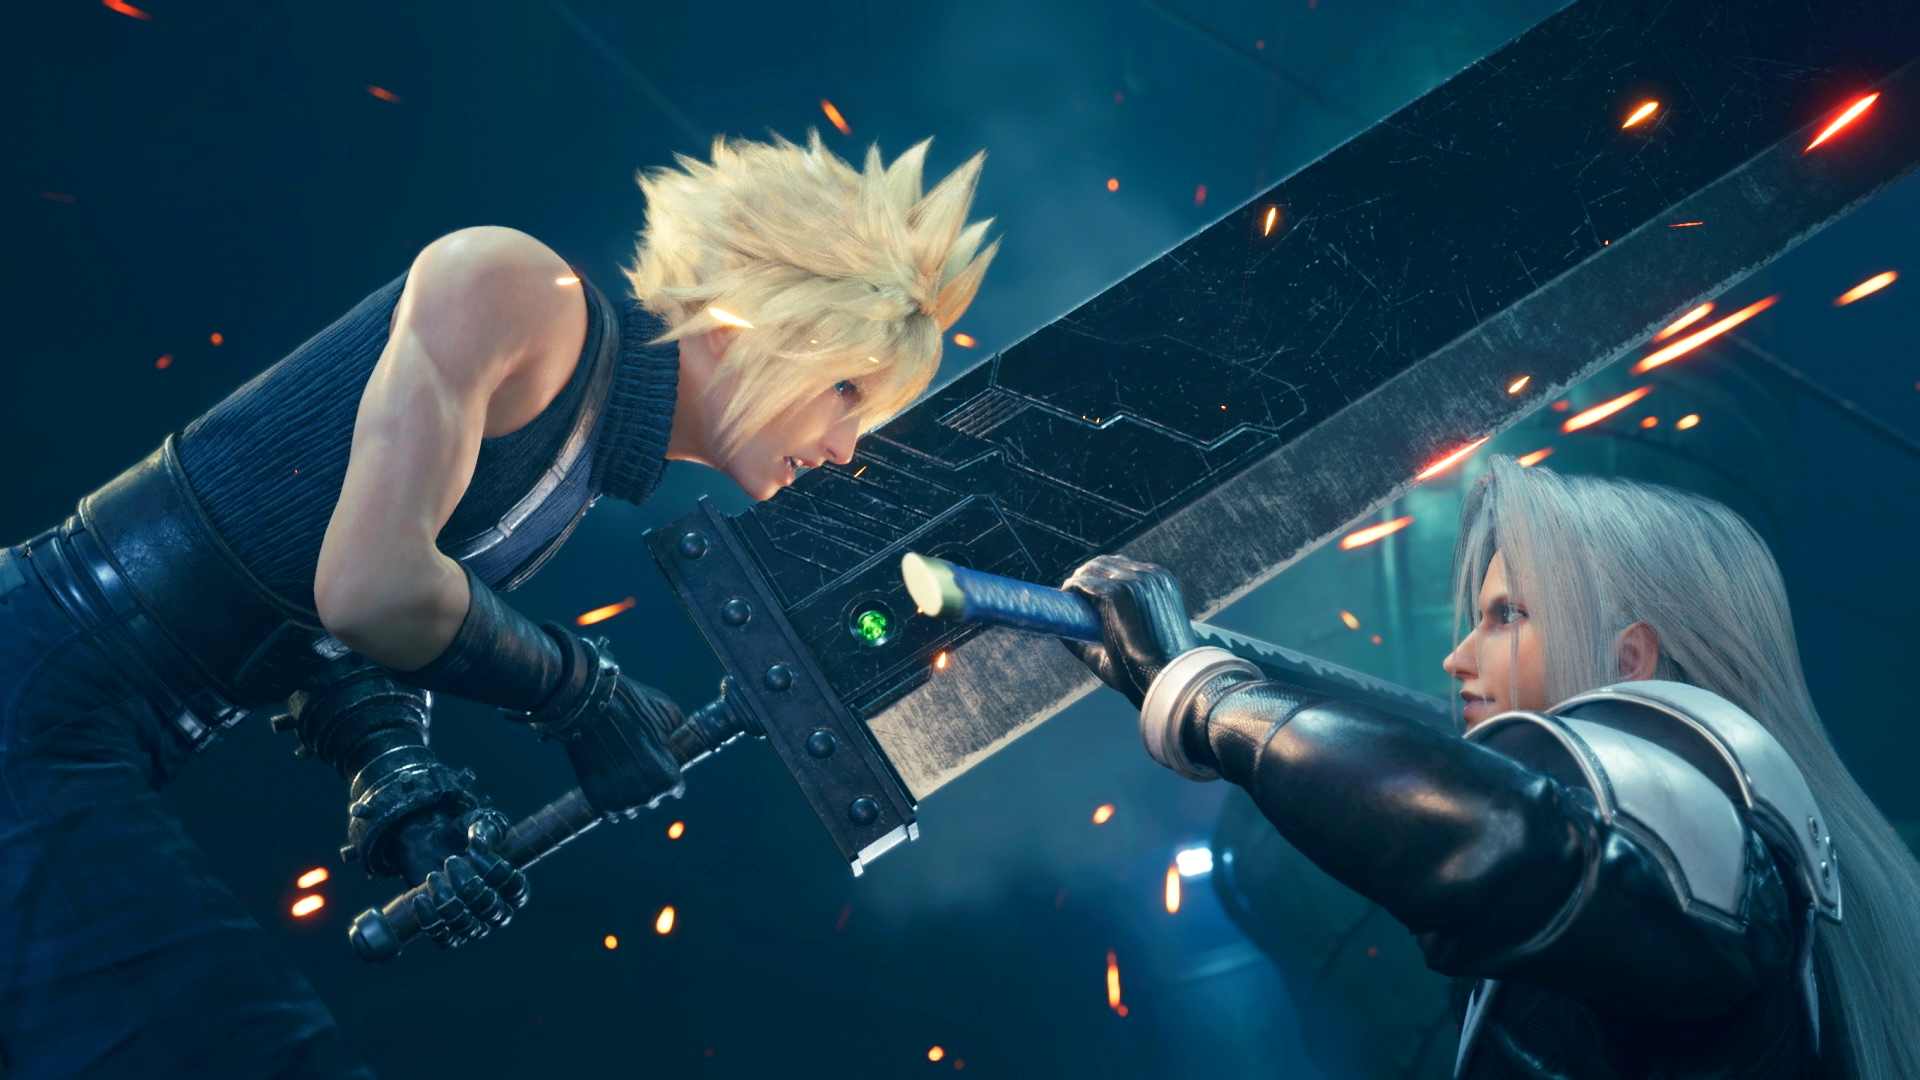 Final Fantasy 7 has sold over 14 million units to date.